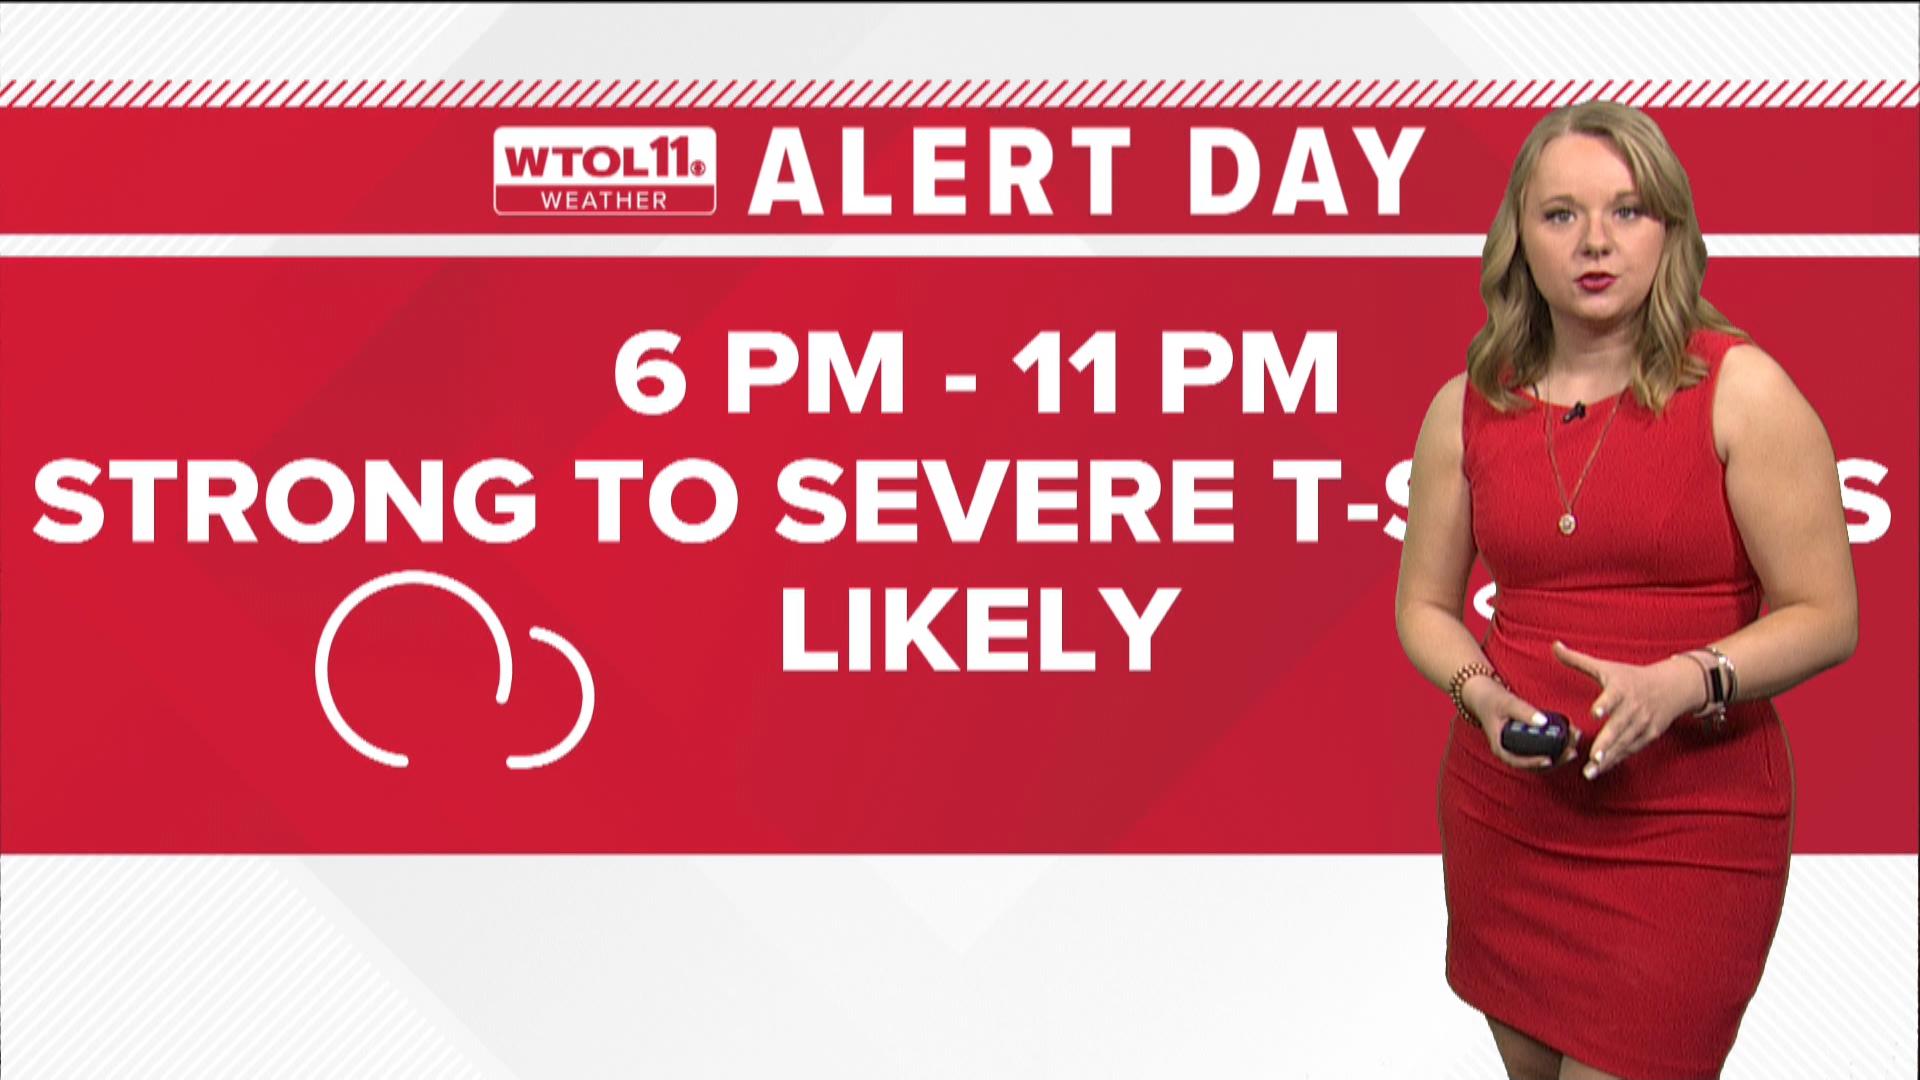 A second and more powerful round of thunderstorms will be possible after 6 p.m. Tuesday that may include damaging winds, large hail and the risk of tornadoes.